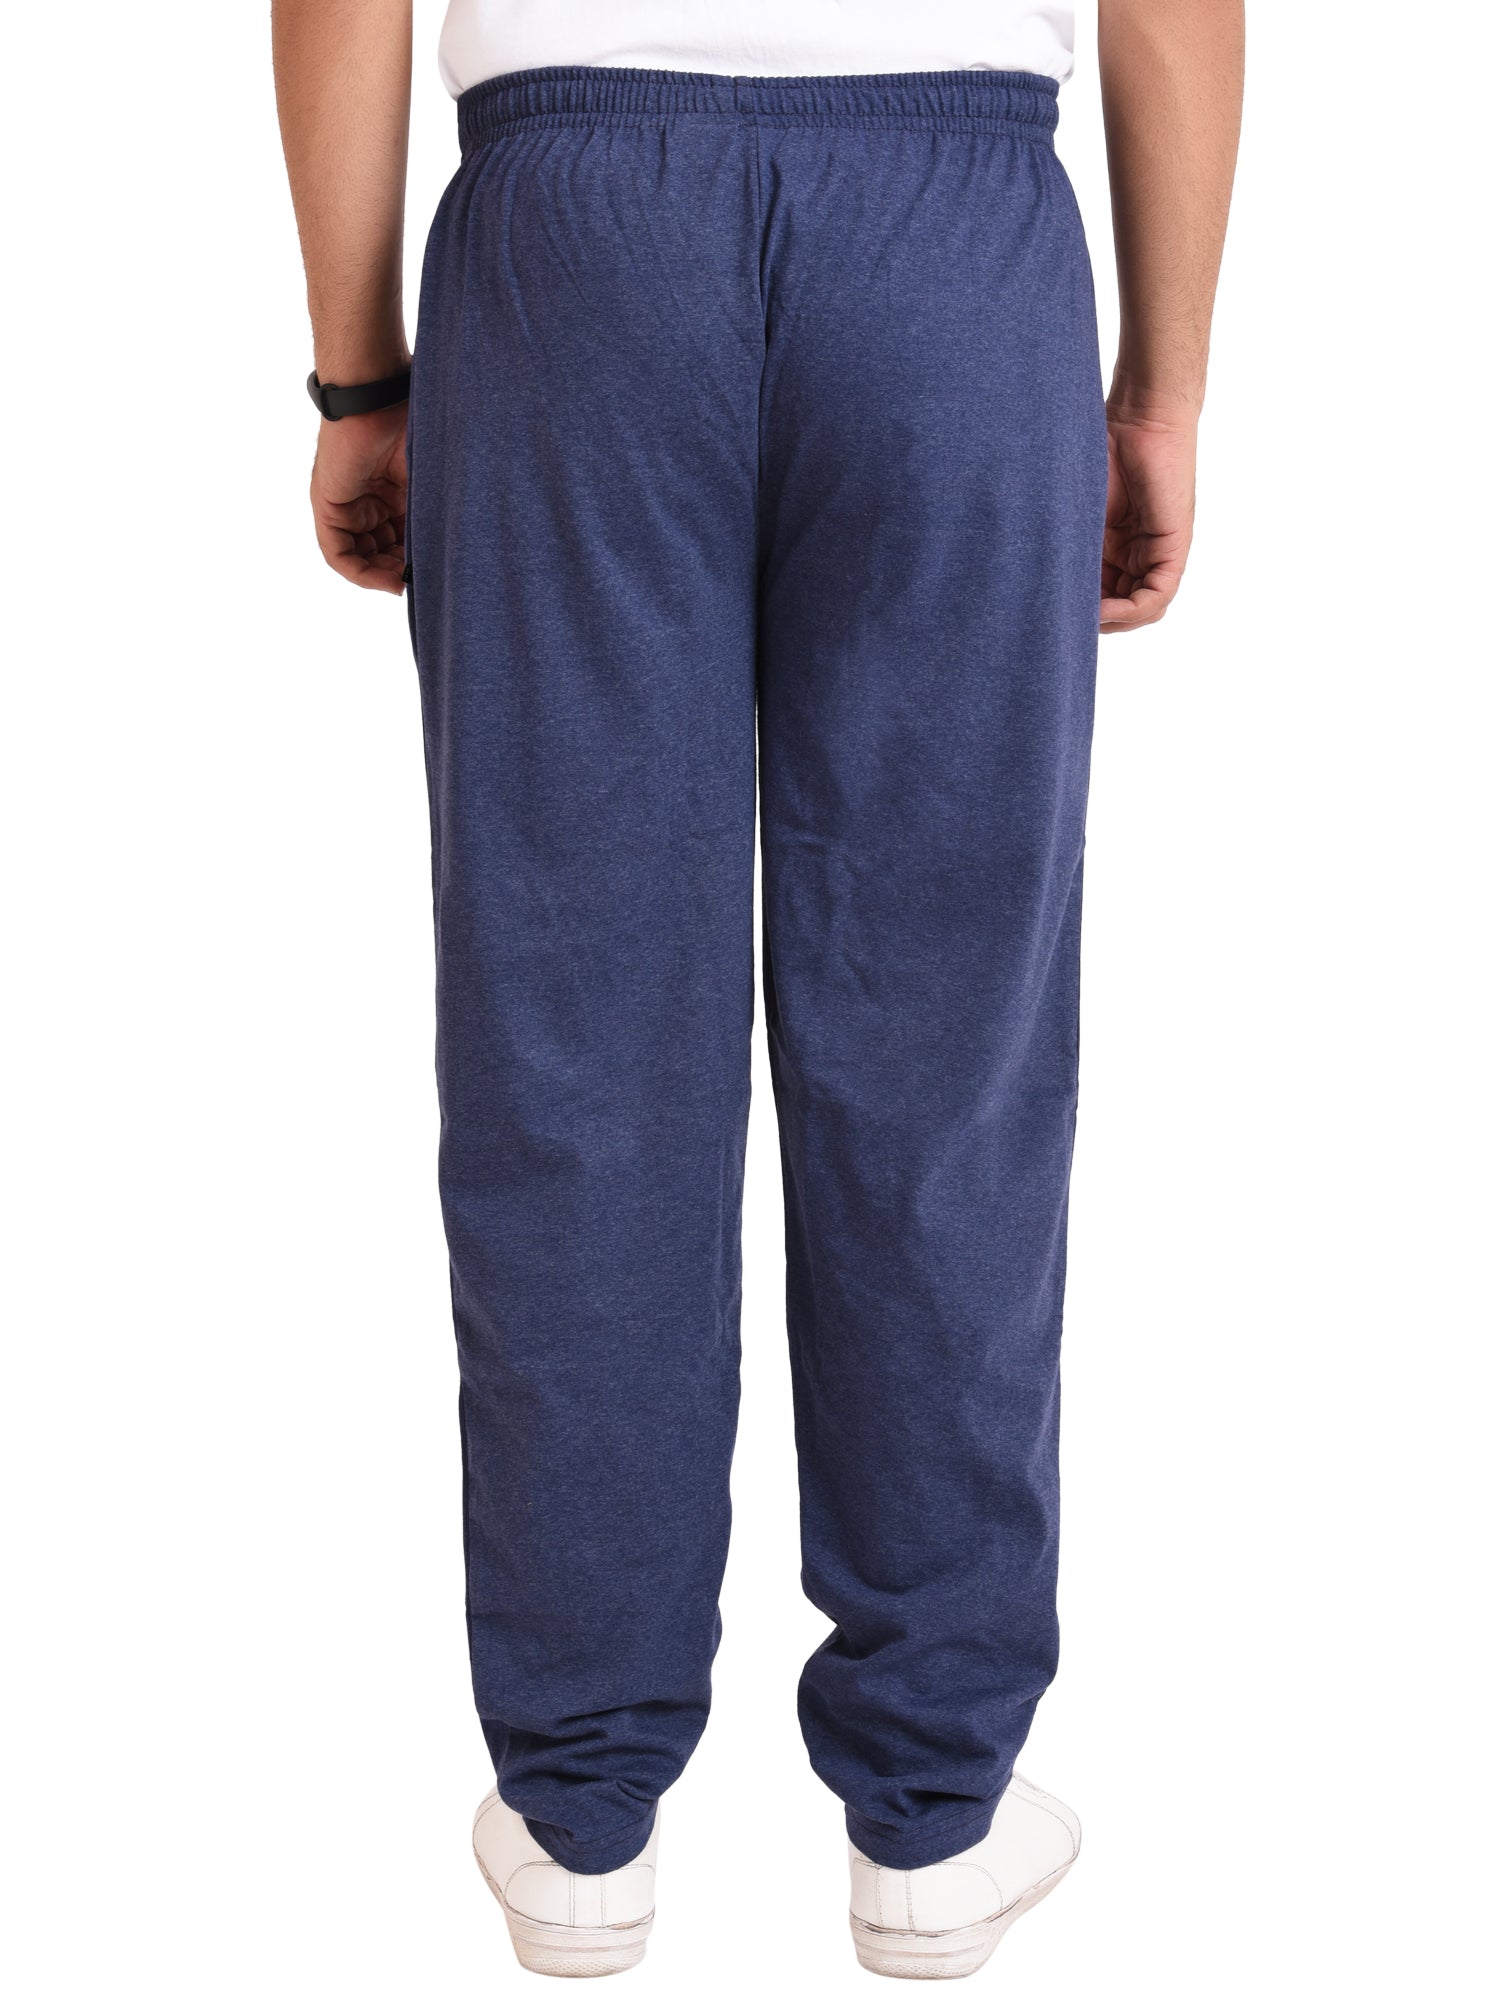 school uniform Track Pant in Guwahati at best price by Adarsh - Justdial